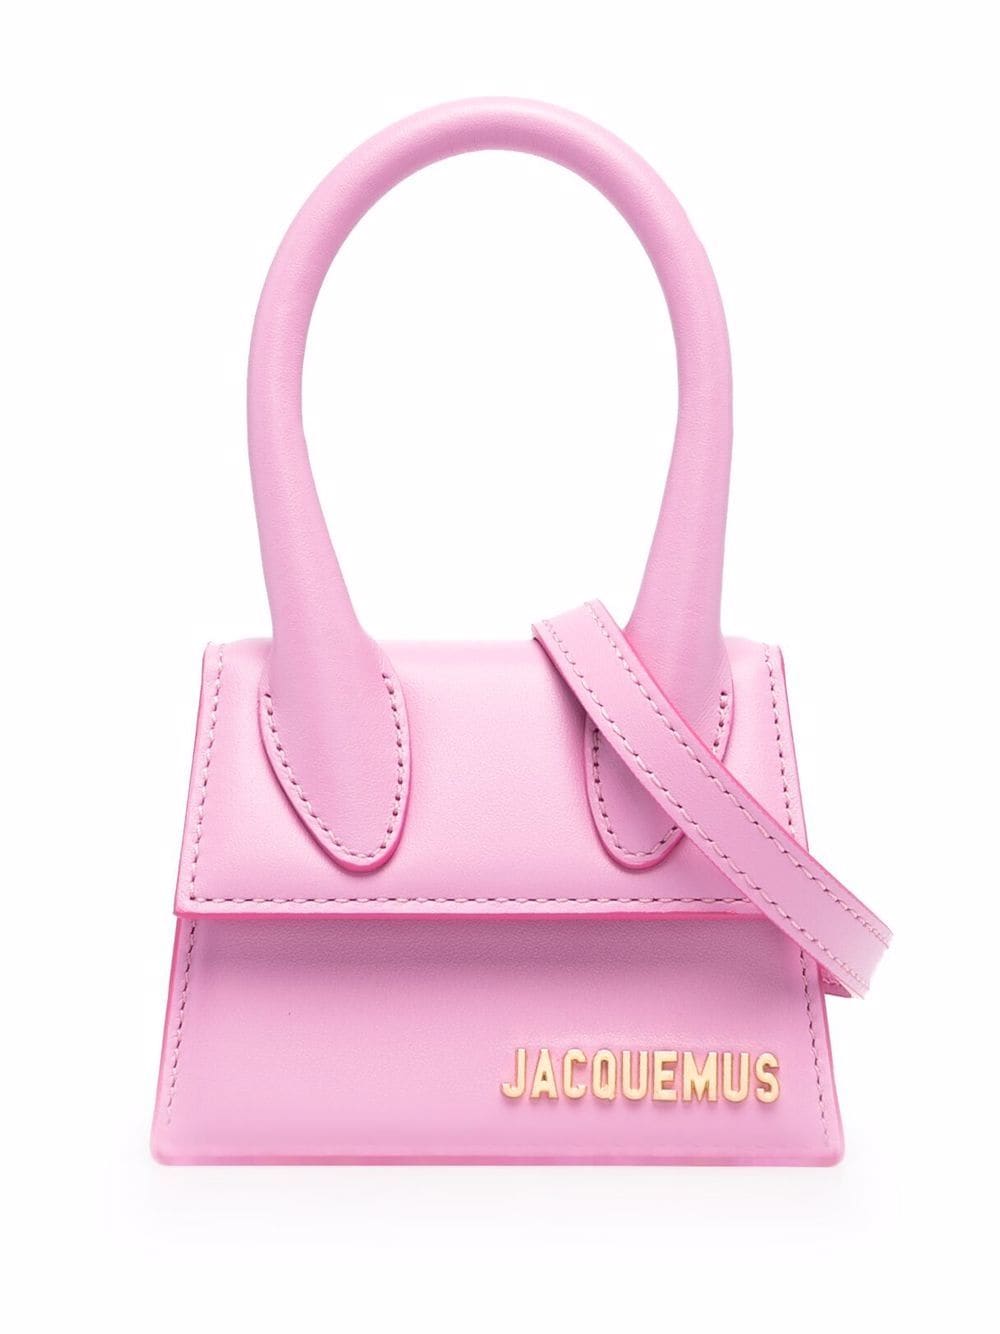 All bags - JACQUEMUS